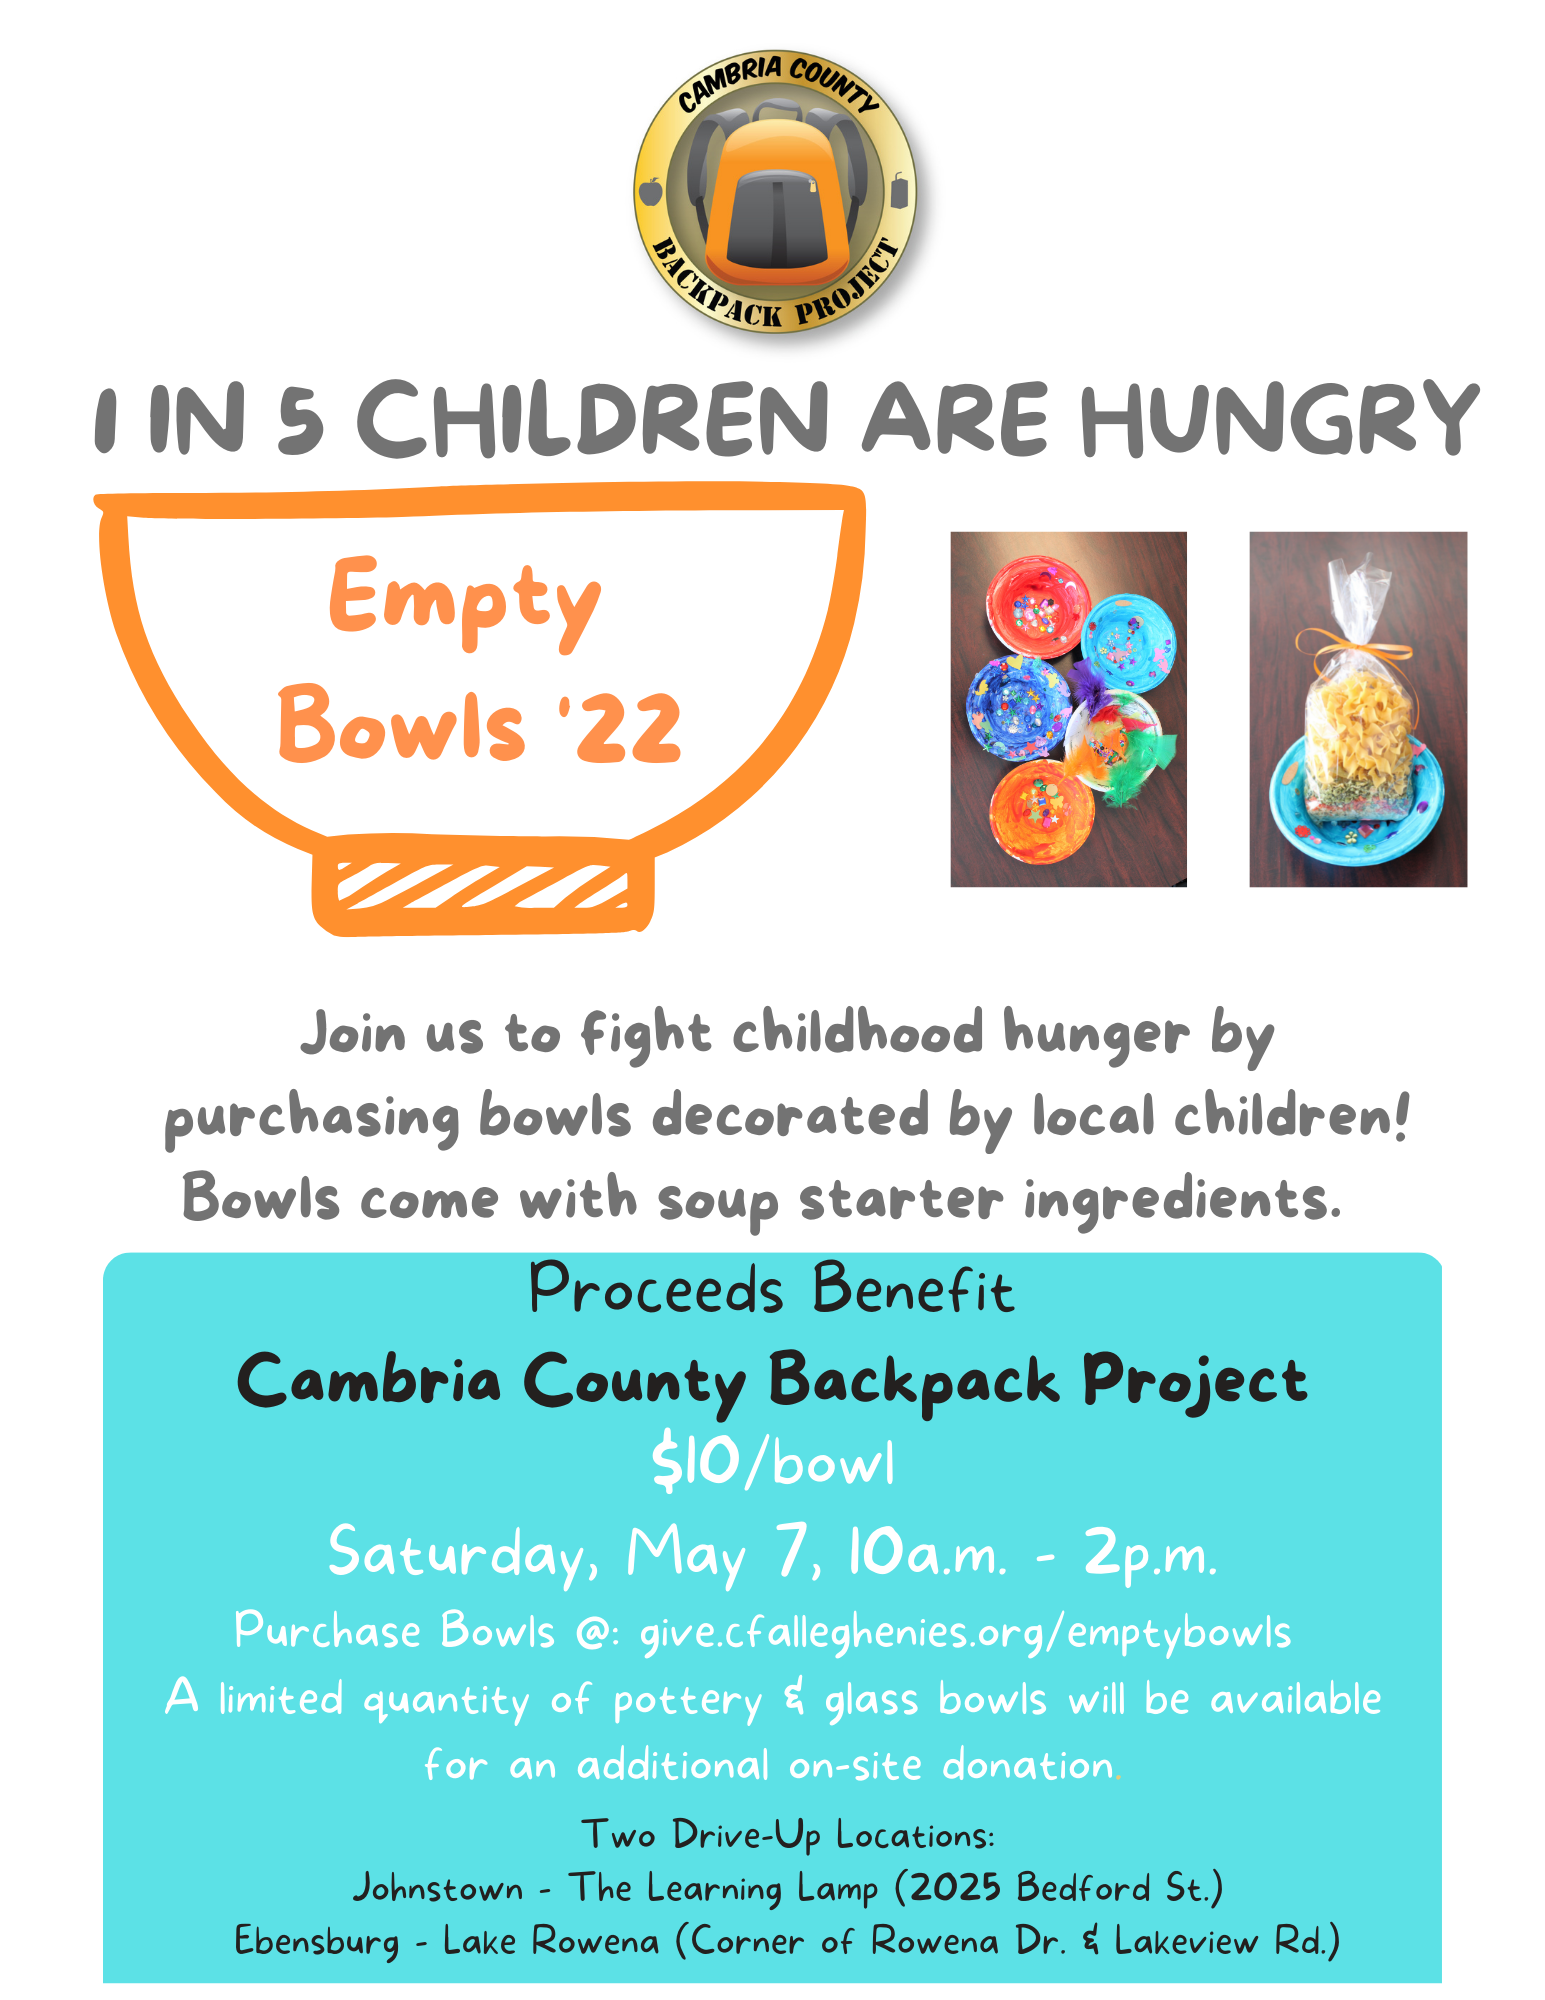 Cambria County Backpack Project